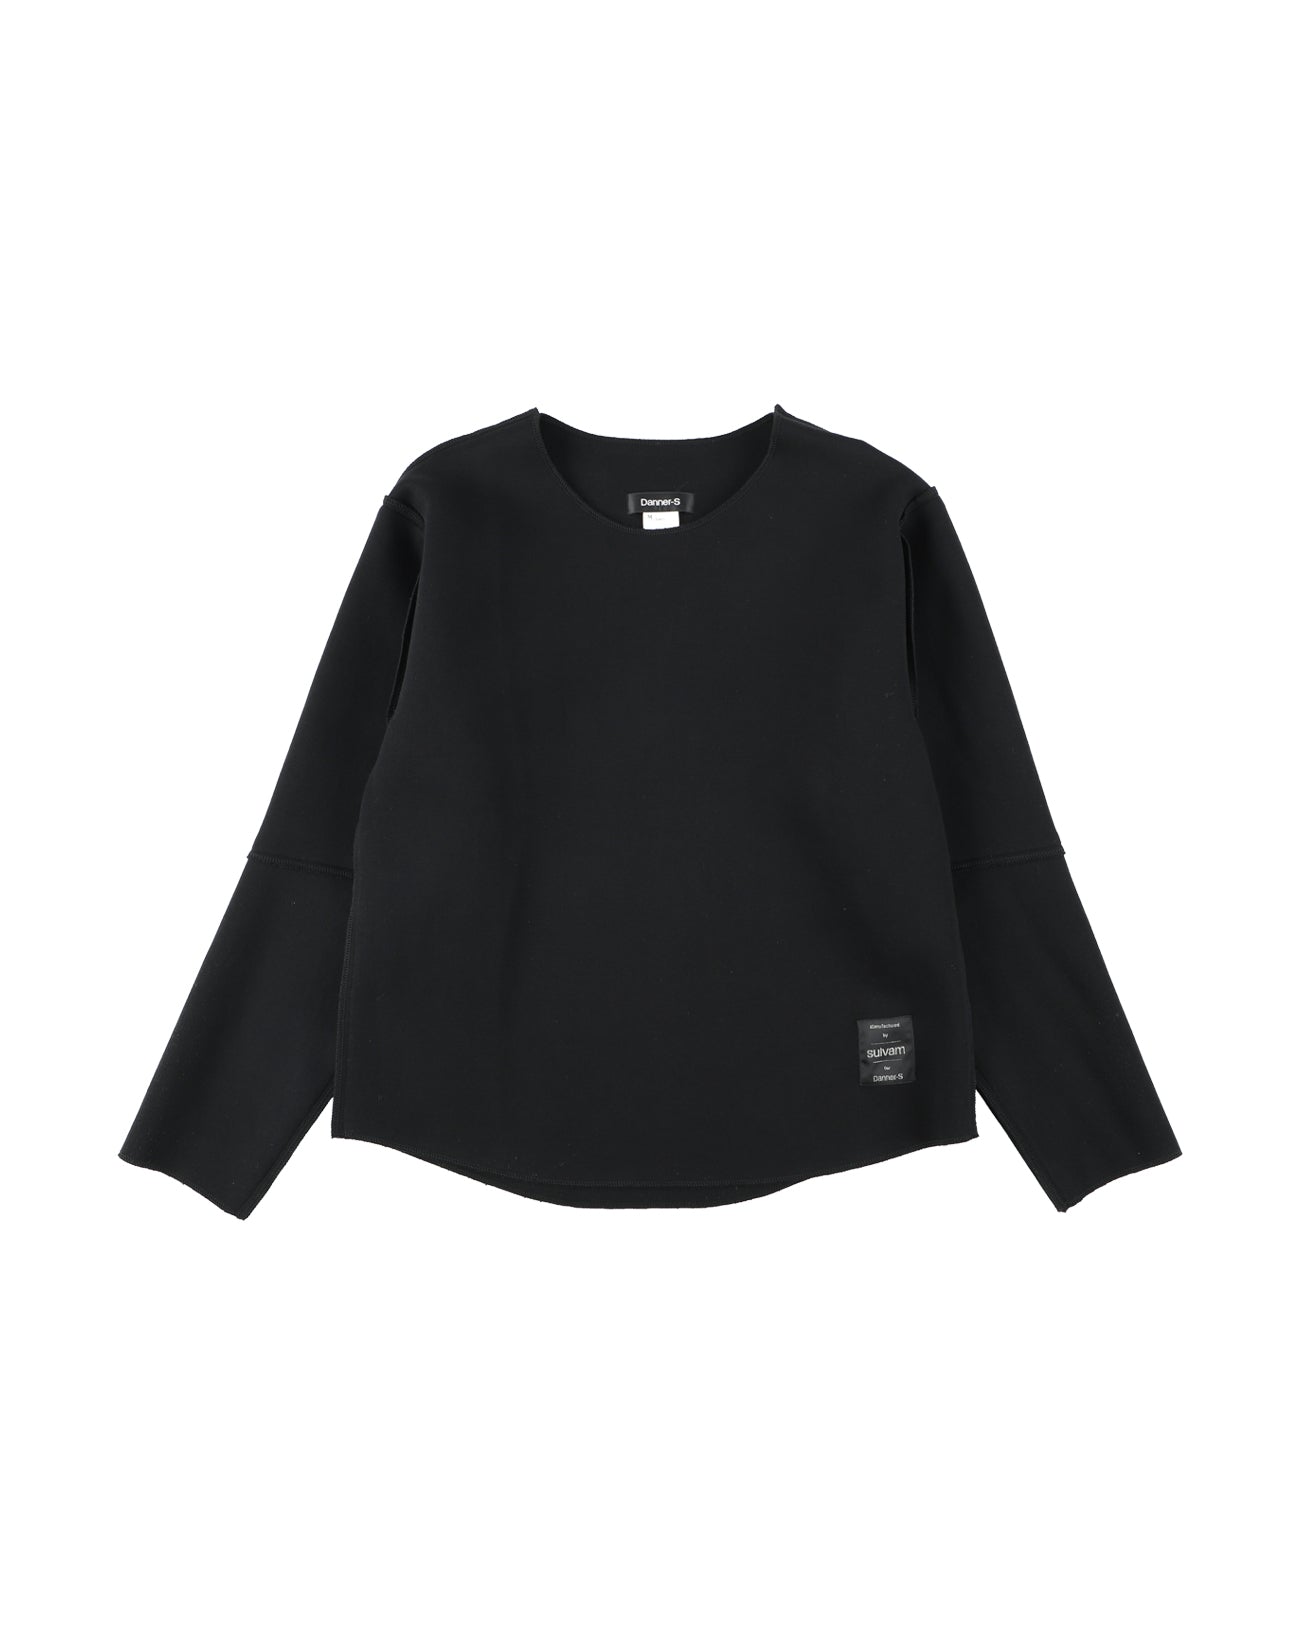 stitch pull over - black - FAB4 ONLINE STORE